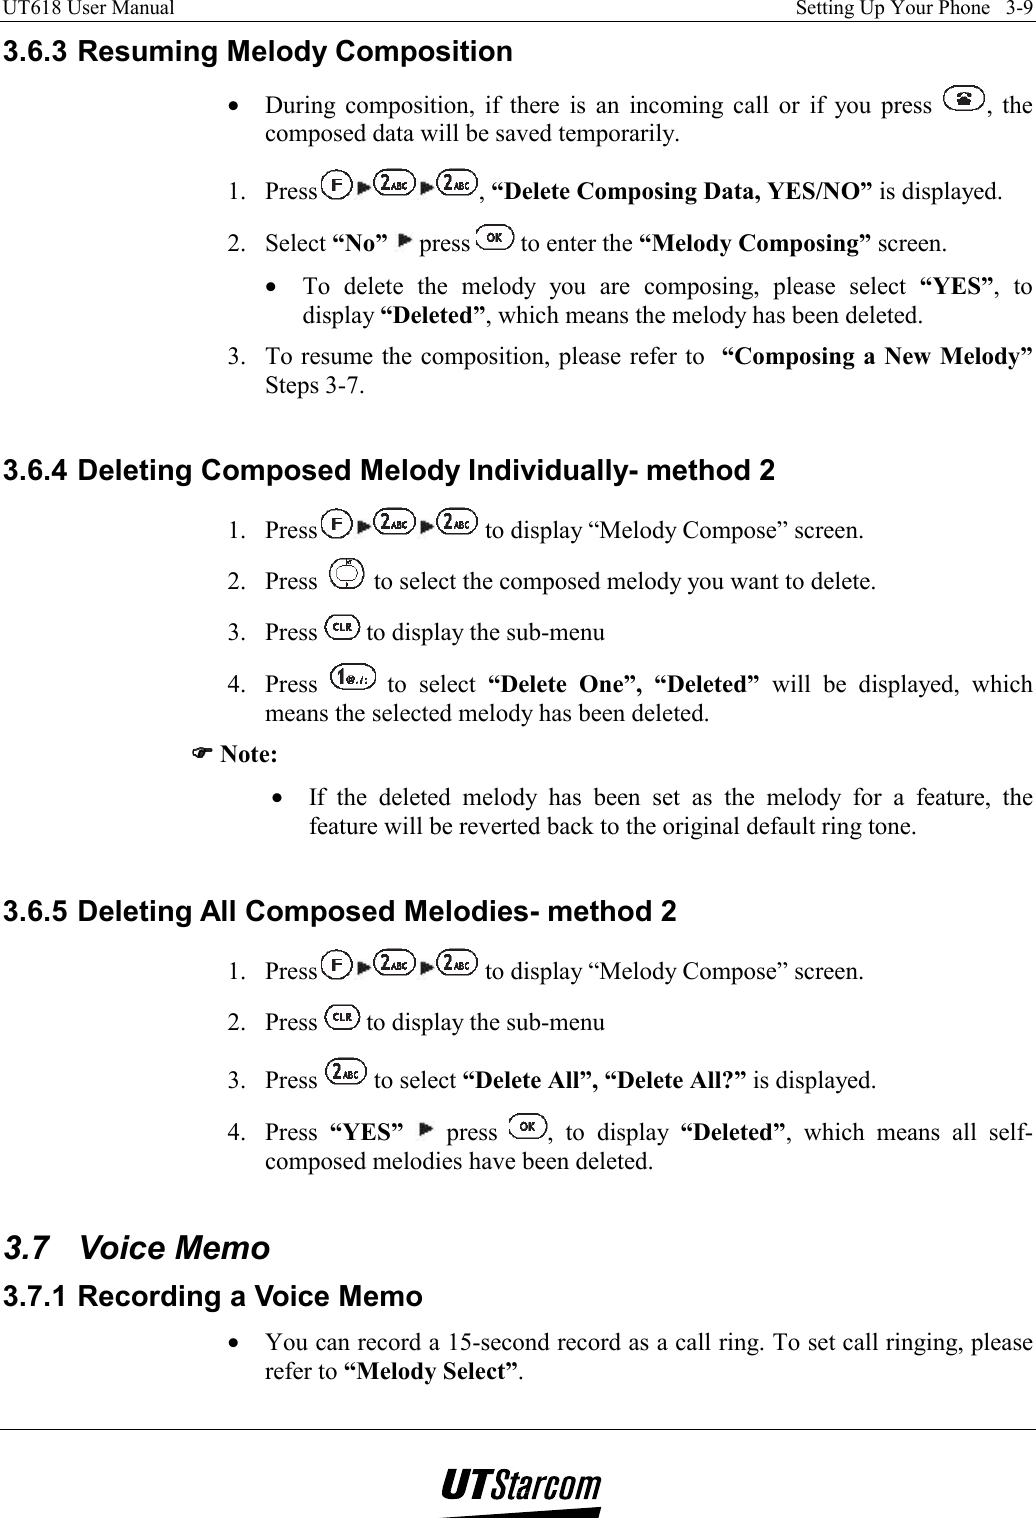 UT618 User Manual    Setting Up Your Phone   3-9   3.6.3 Resuming Melody Composition •  During composition, if there is an incoming call or if you press  , the composed data will be saved temporarily. 1. Press , “Delete Composing Data, YES/NO” is displayed. 2. Select “No”  press   to enter the “Melody Composing” screen. •  To delete the melody you are composing, please select “YES”, to display “Deleted”, which means the melody has been deleted. 3.  To resume the composition, please refer to  “Composing a New Melody” Steps 3-7.  3.6.4 Deleting Composed Melody Individually- method 2 1. Press  to display “Melody Compose” screen. 2. Press   to select the composed melody you want to delete. 3. Press   to display the sub-menu 4. Press   to select “Delete One”, “Deleted” will be displayed, which means the selected melody has been deleted. )))) Note: •  If the deleted melody has been set as the melody for a feature, the feature will be reverted back to the original default ring tone.  3.6.5 Deleting All Composed Melodies- method 2 1. Press  to display “Melody Compose” screen. 2. Press   to display the sub-menu 3. Press   to select “Delete All”, “Delete All?” is displayed. 4. Press “YES”  press  , to display “Deleted”, which means all self-composed melodies have been deleted.  3.7 Voice Memo 3.7.1 Recording a Voice Memo •  You can record a 15-second record as a call ring. To set call ringing, please refer to “Melody Select”. 